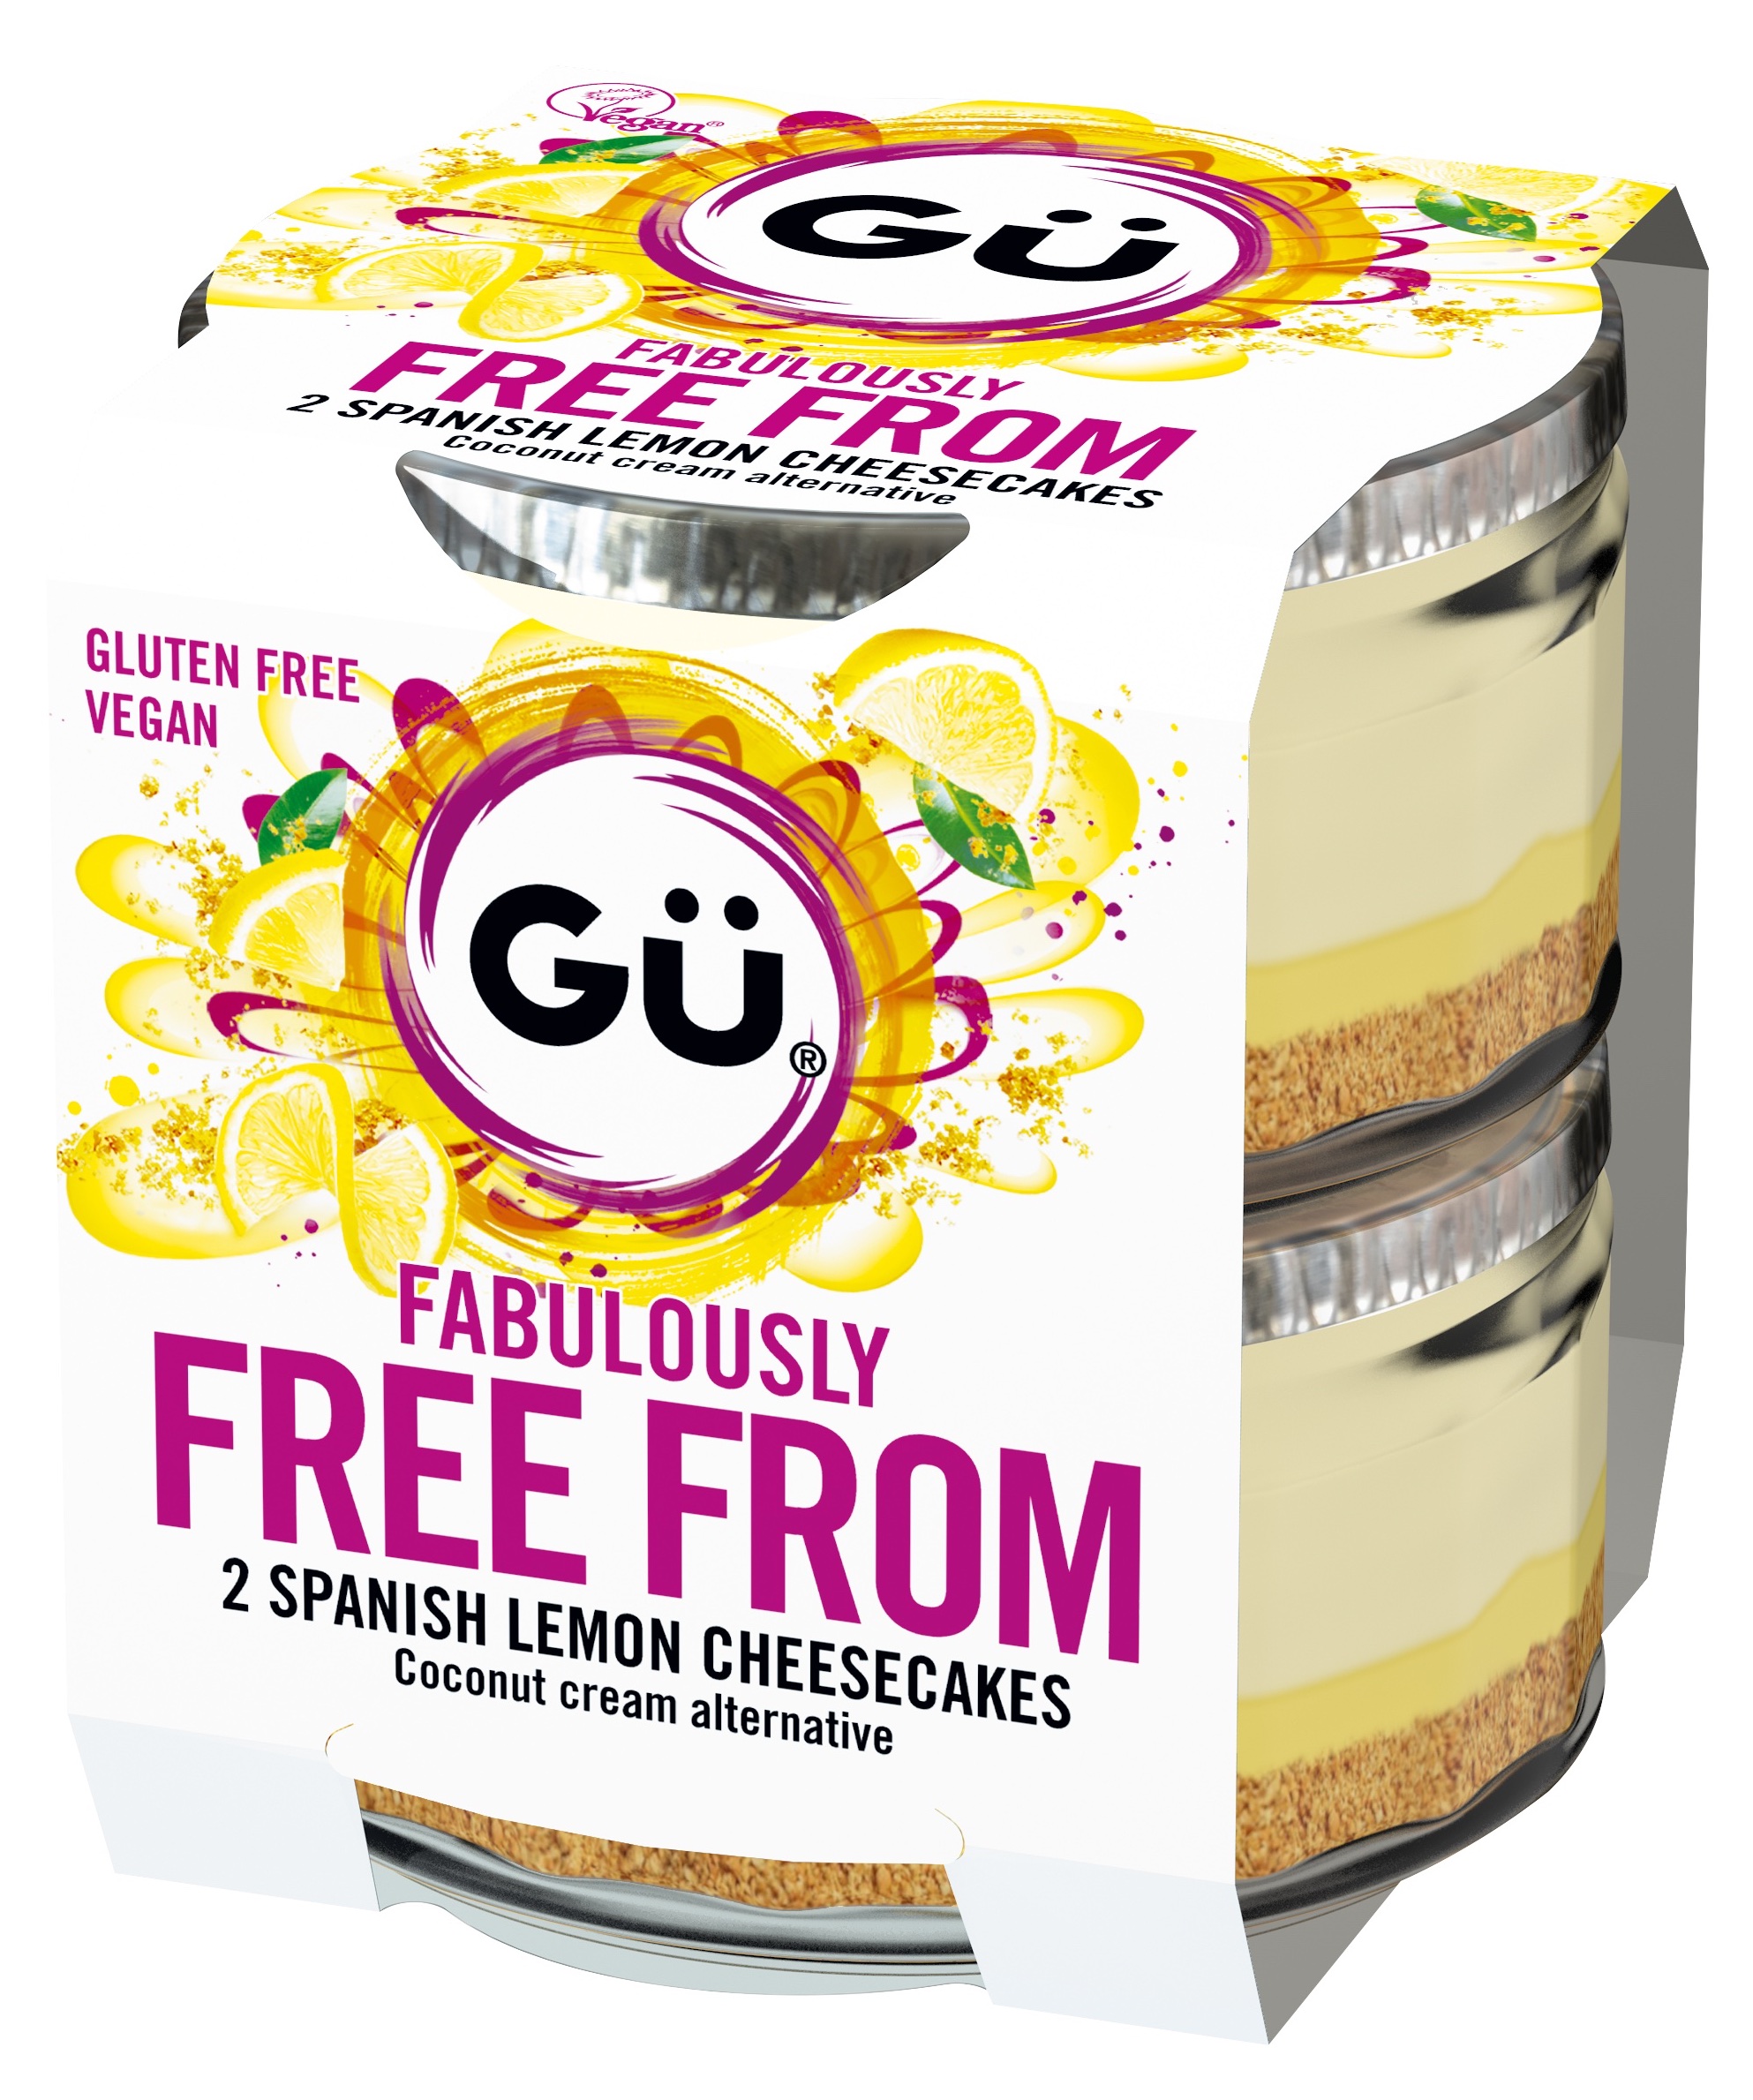 Gü have just launched four new gluten-free desserts!